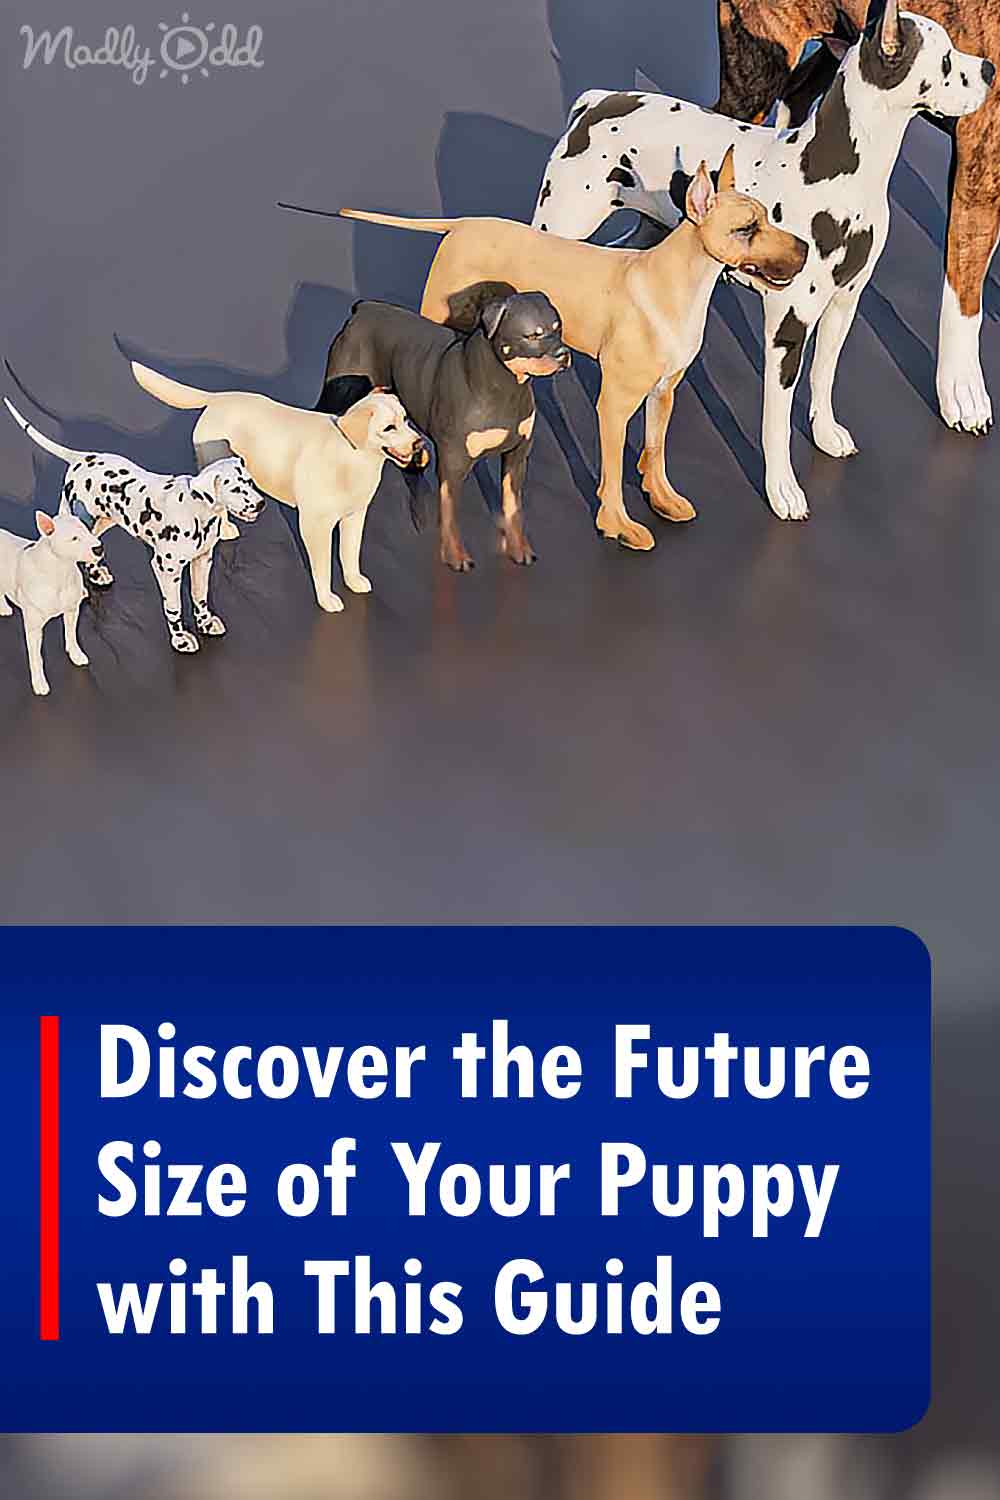 Discover the Future Size of Your Puppy with This Guide